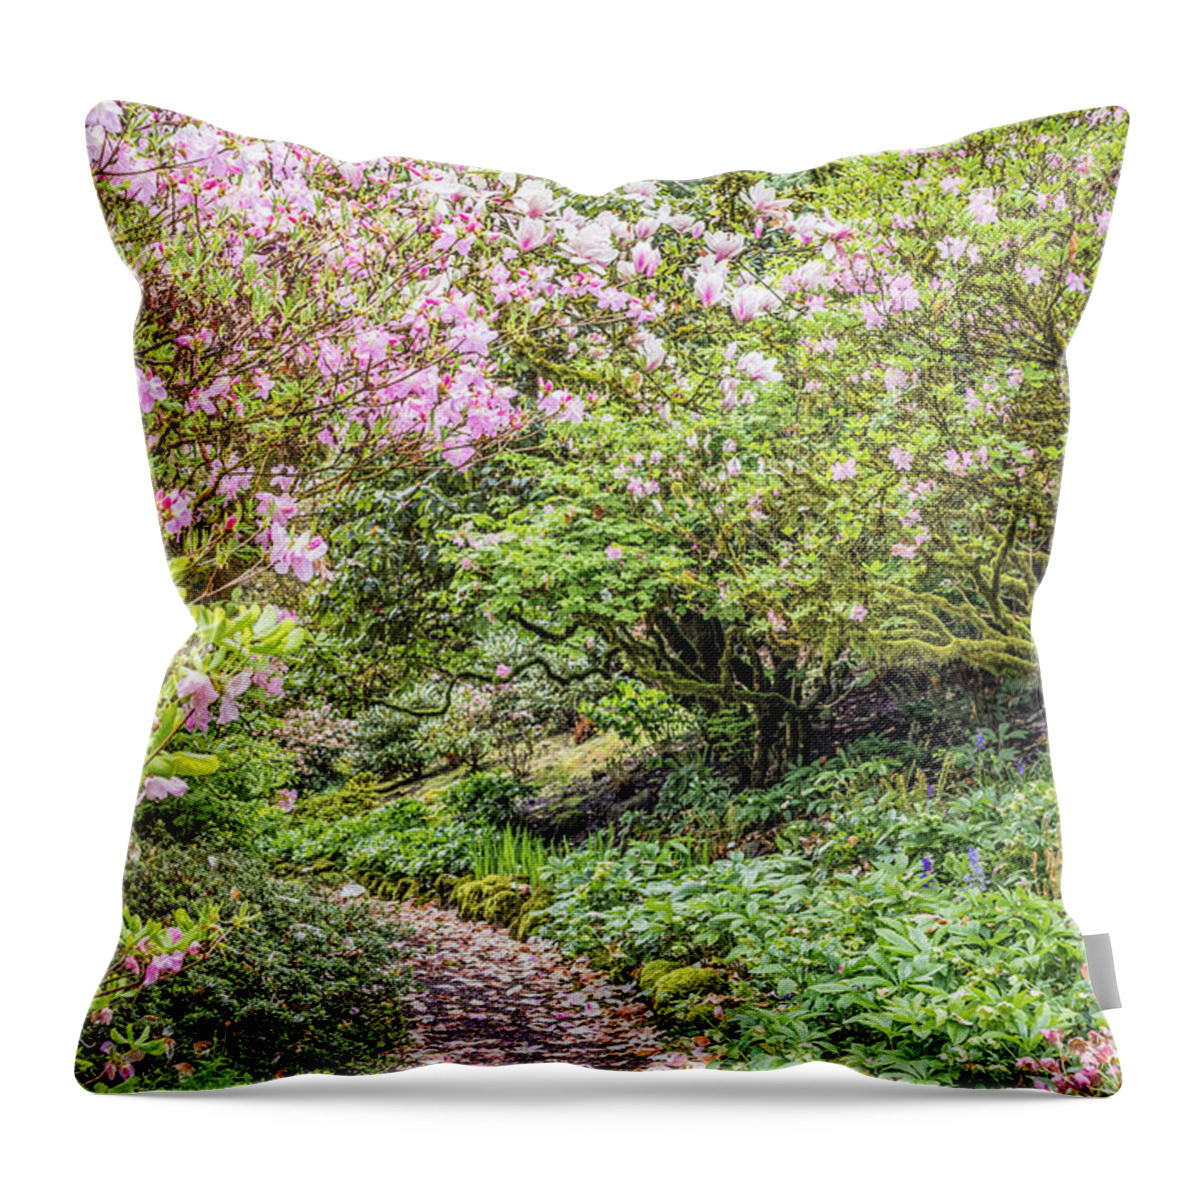 Petal Pathway Throw Pillow featuring the photograph Pink Petal Pathway by Priya Ghose